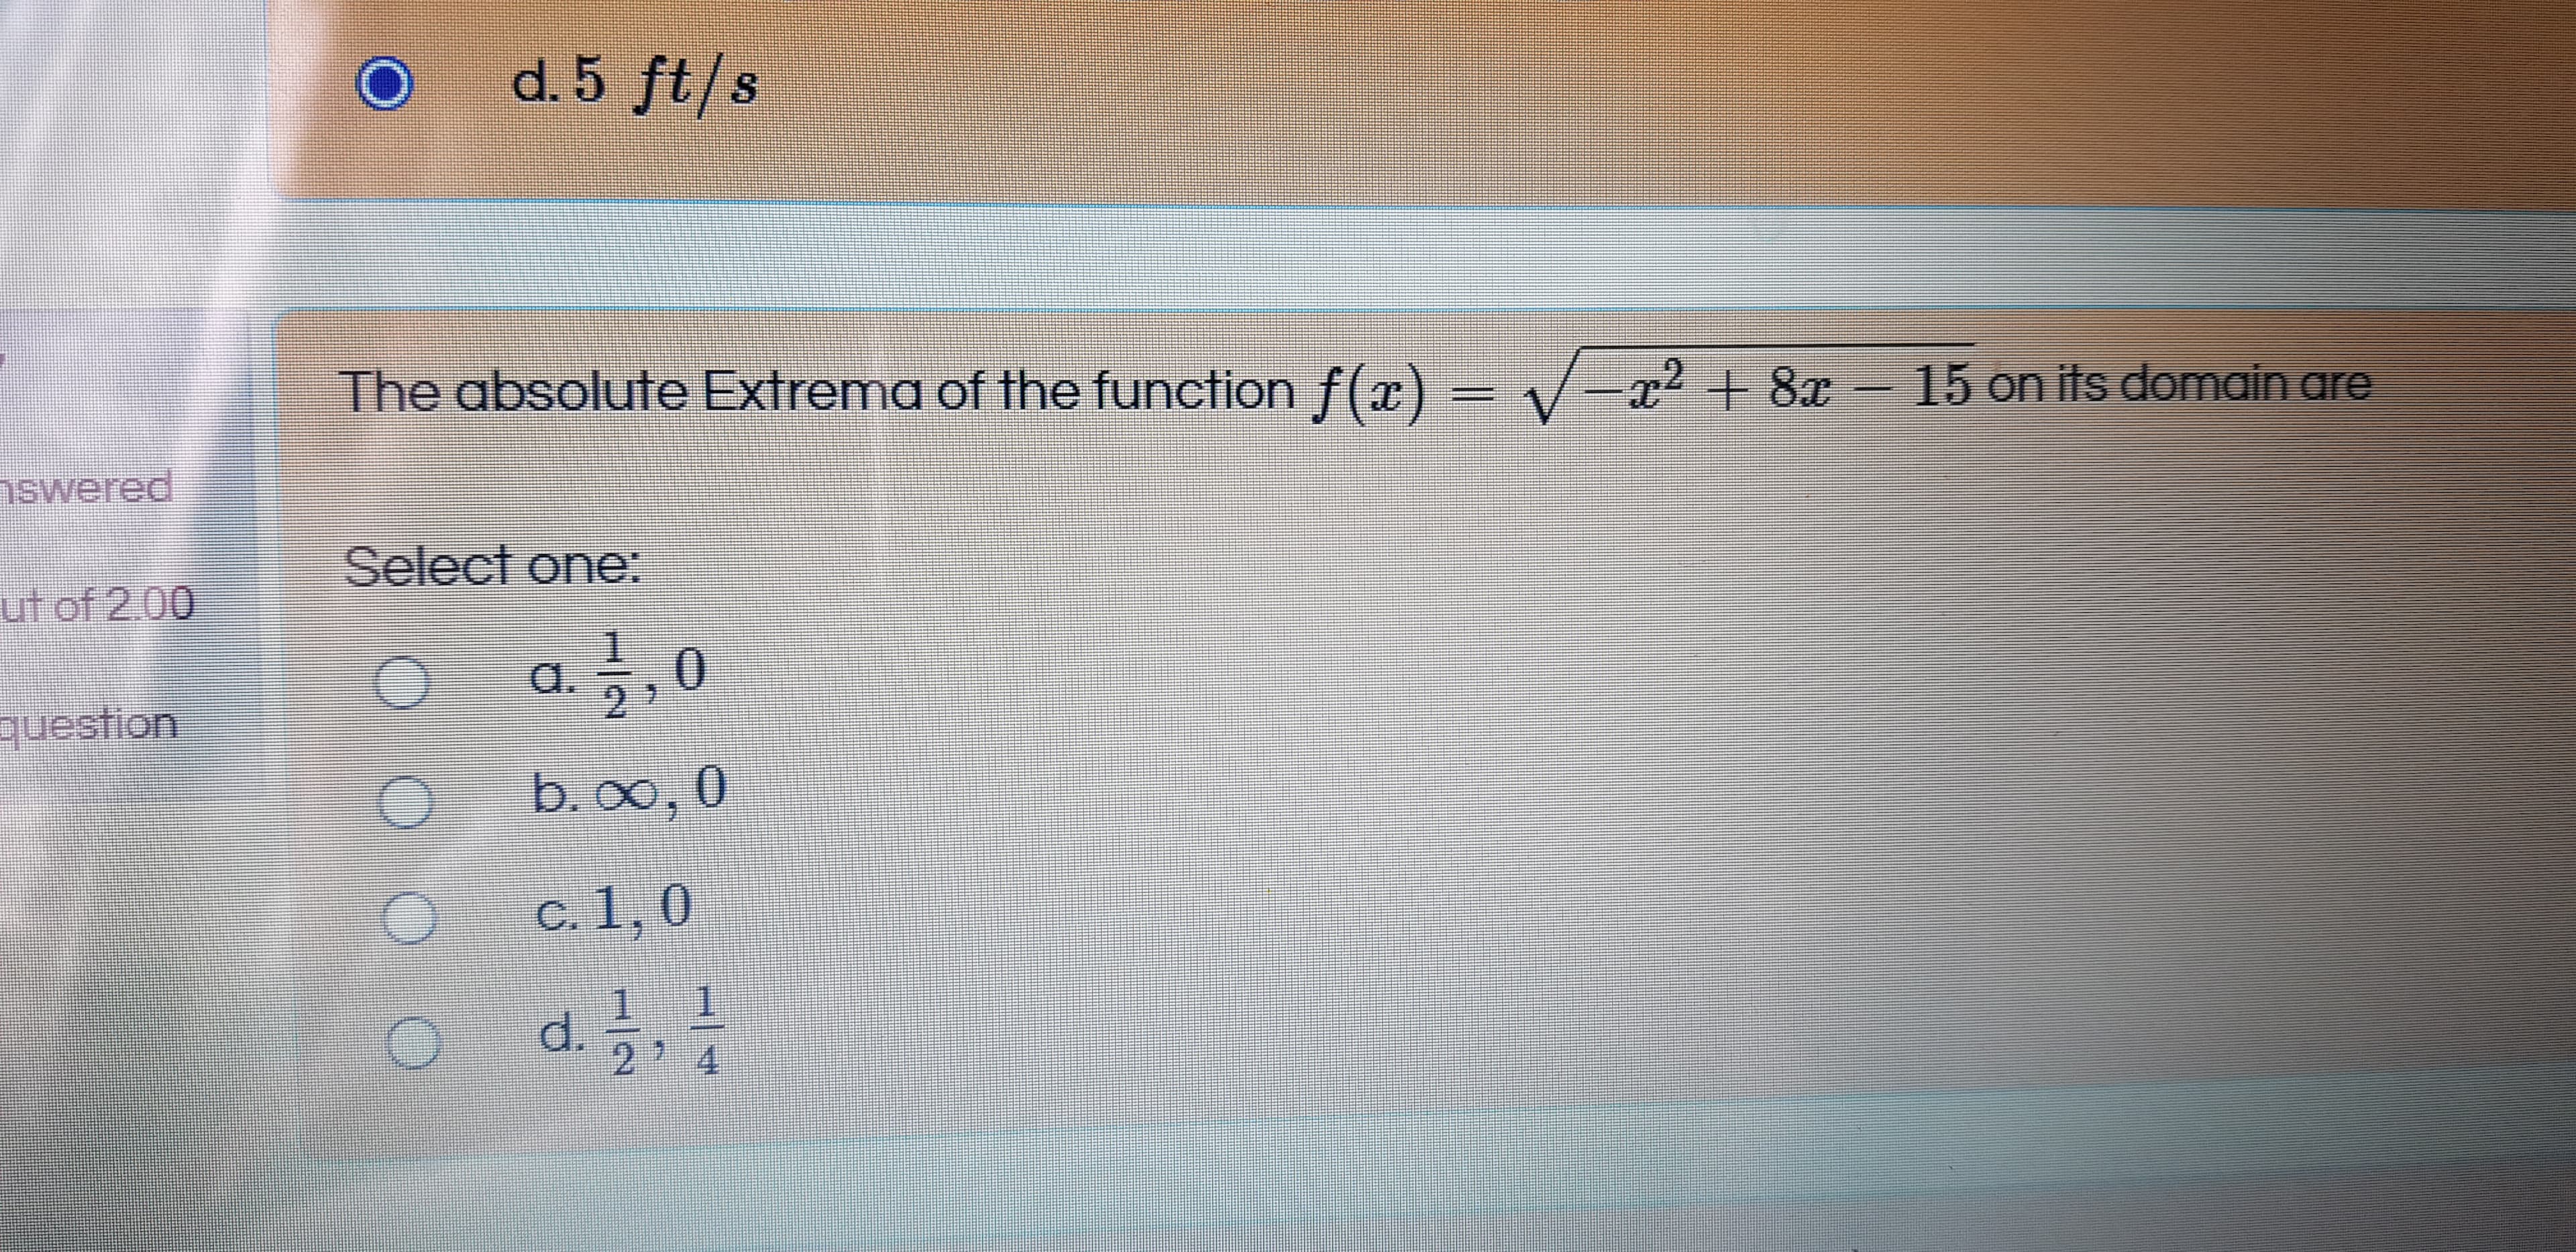 The absolute Extrema of the function f(x) = /-x²+ 8x - 15 on its domain are
